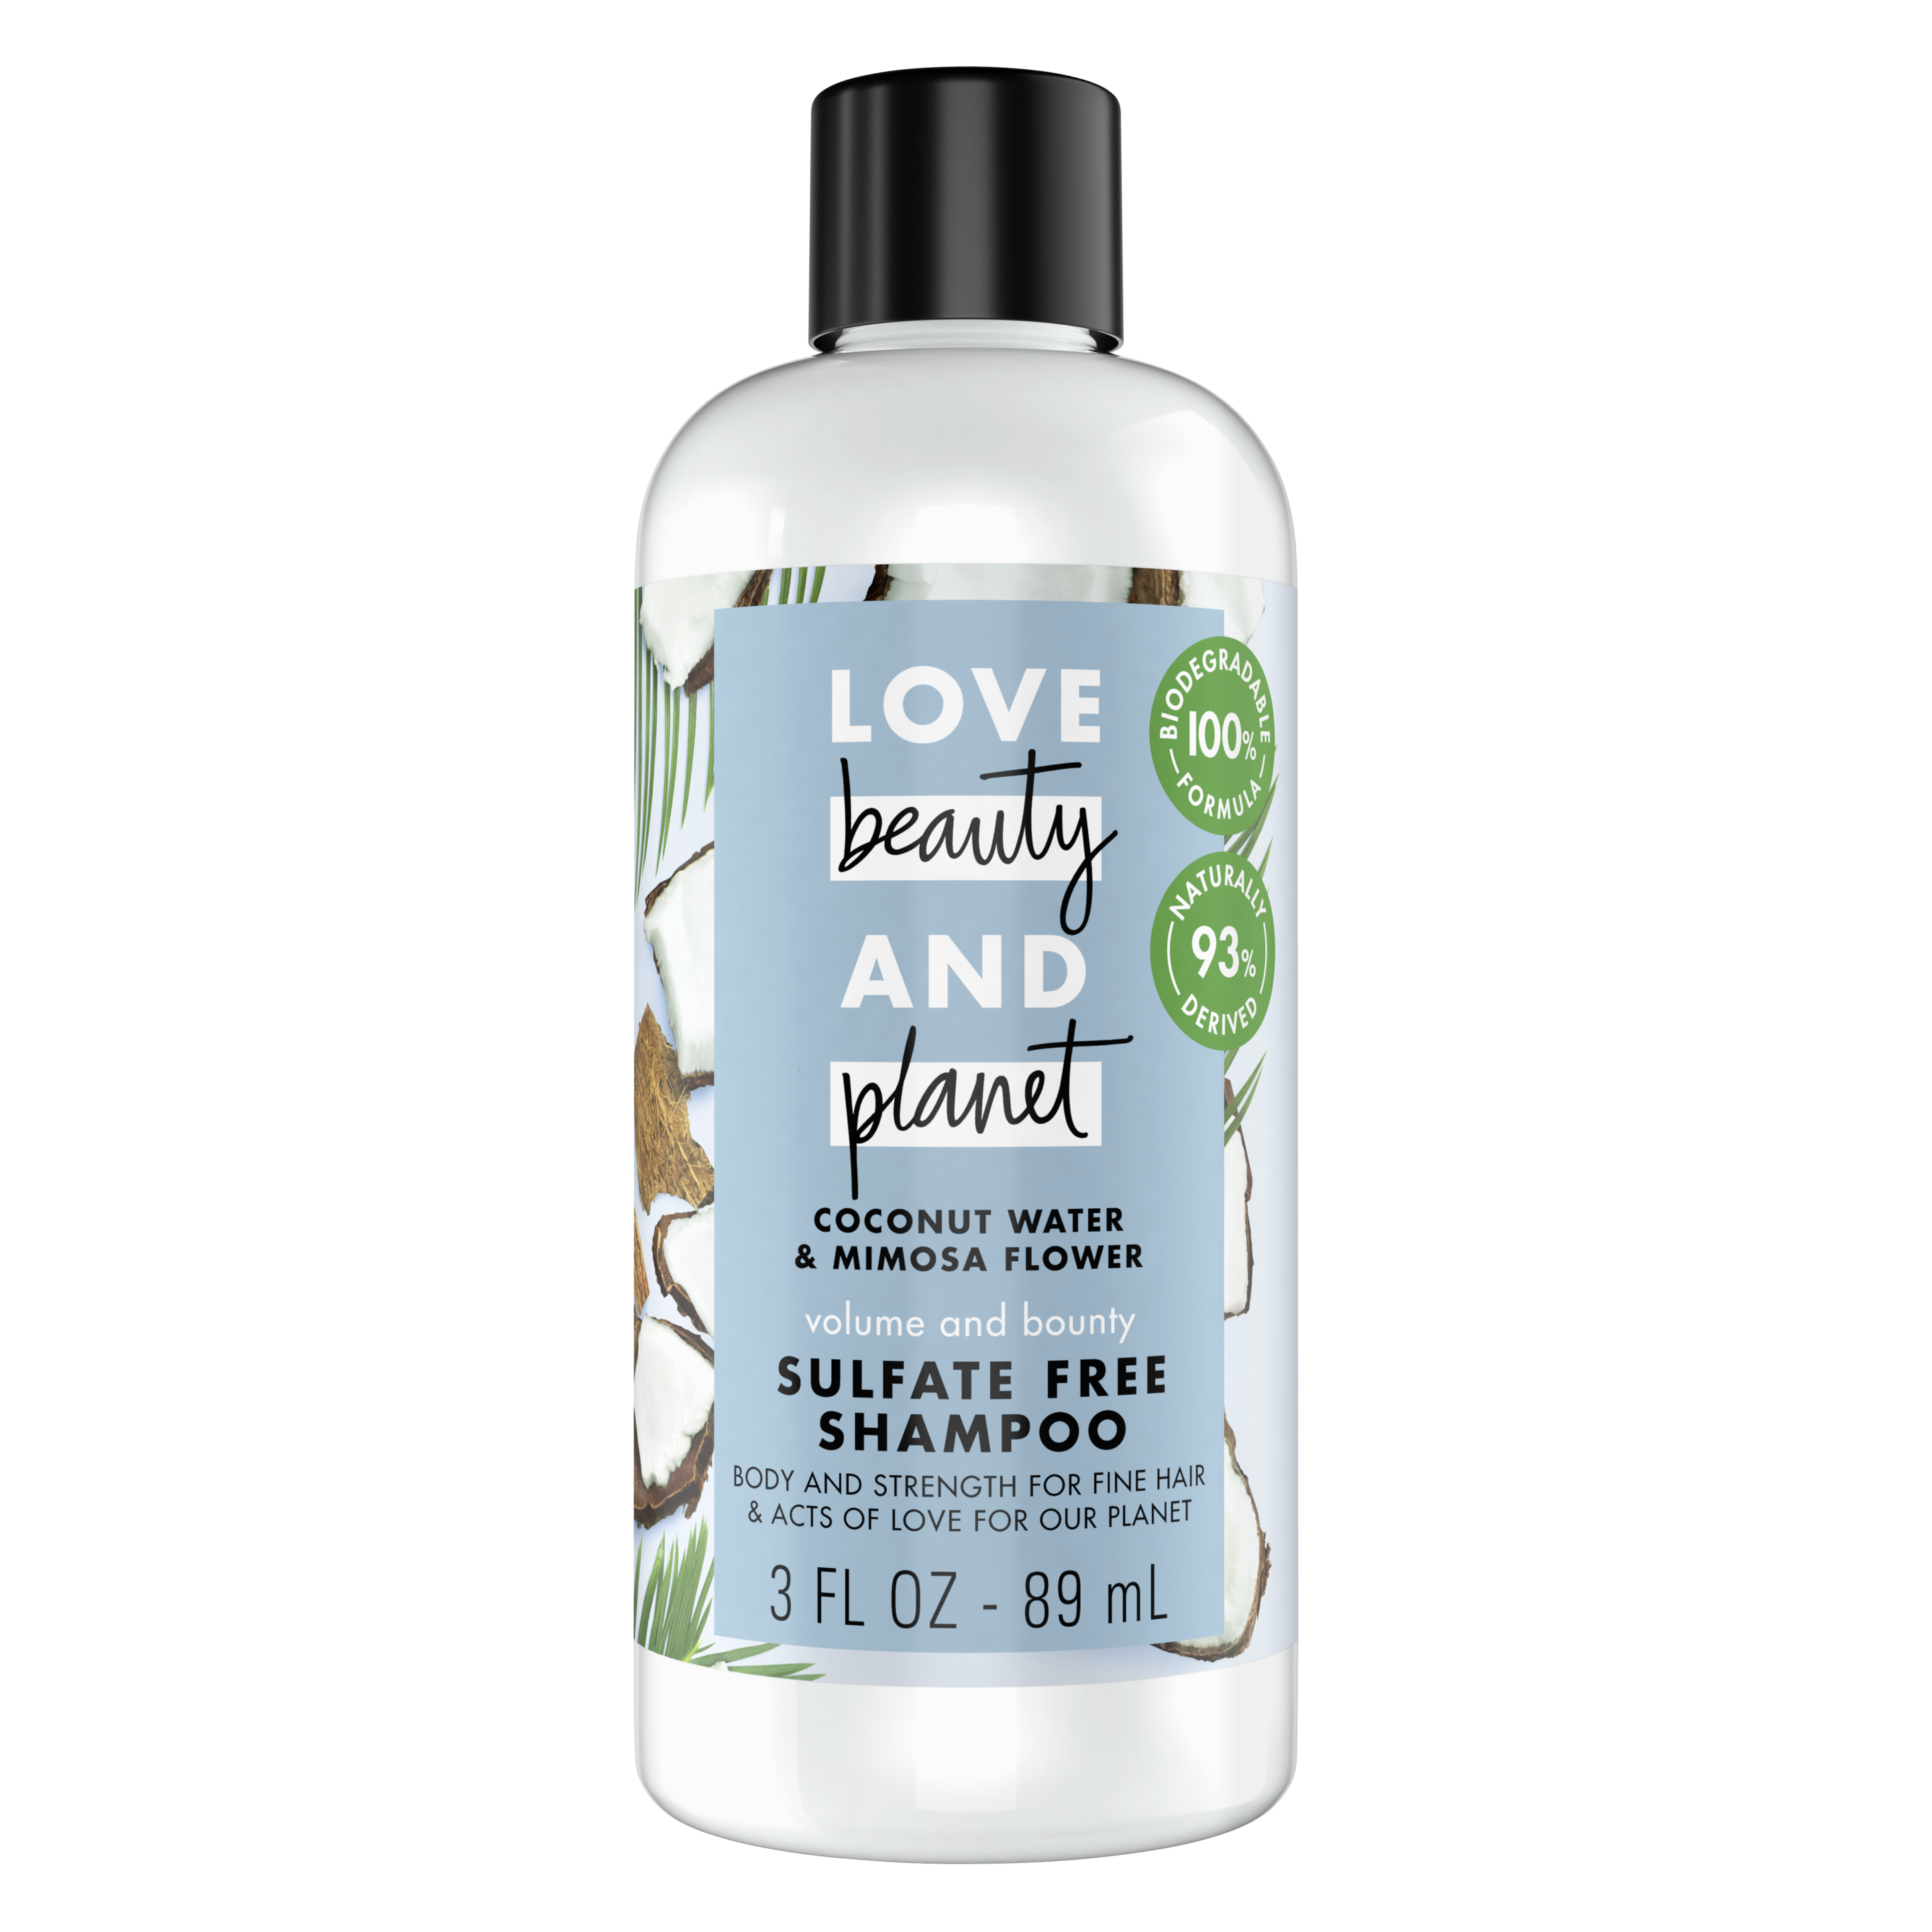 sulfate-free coconut water & mimosa flower shampoo